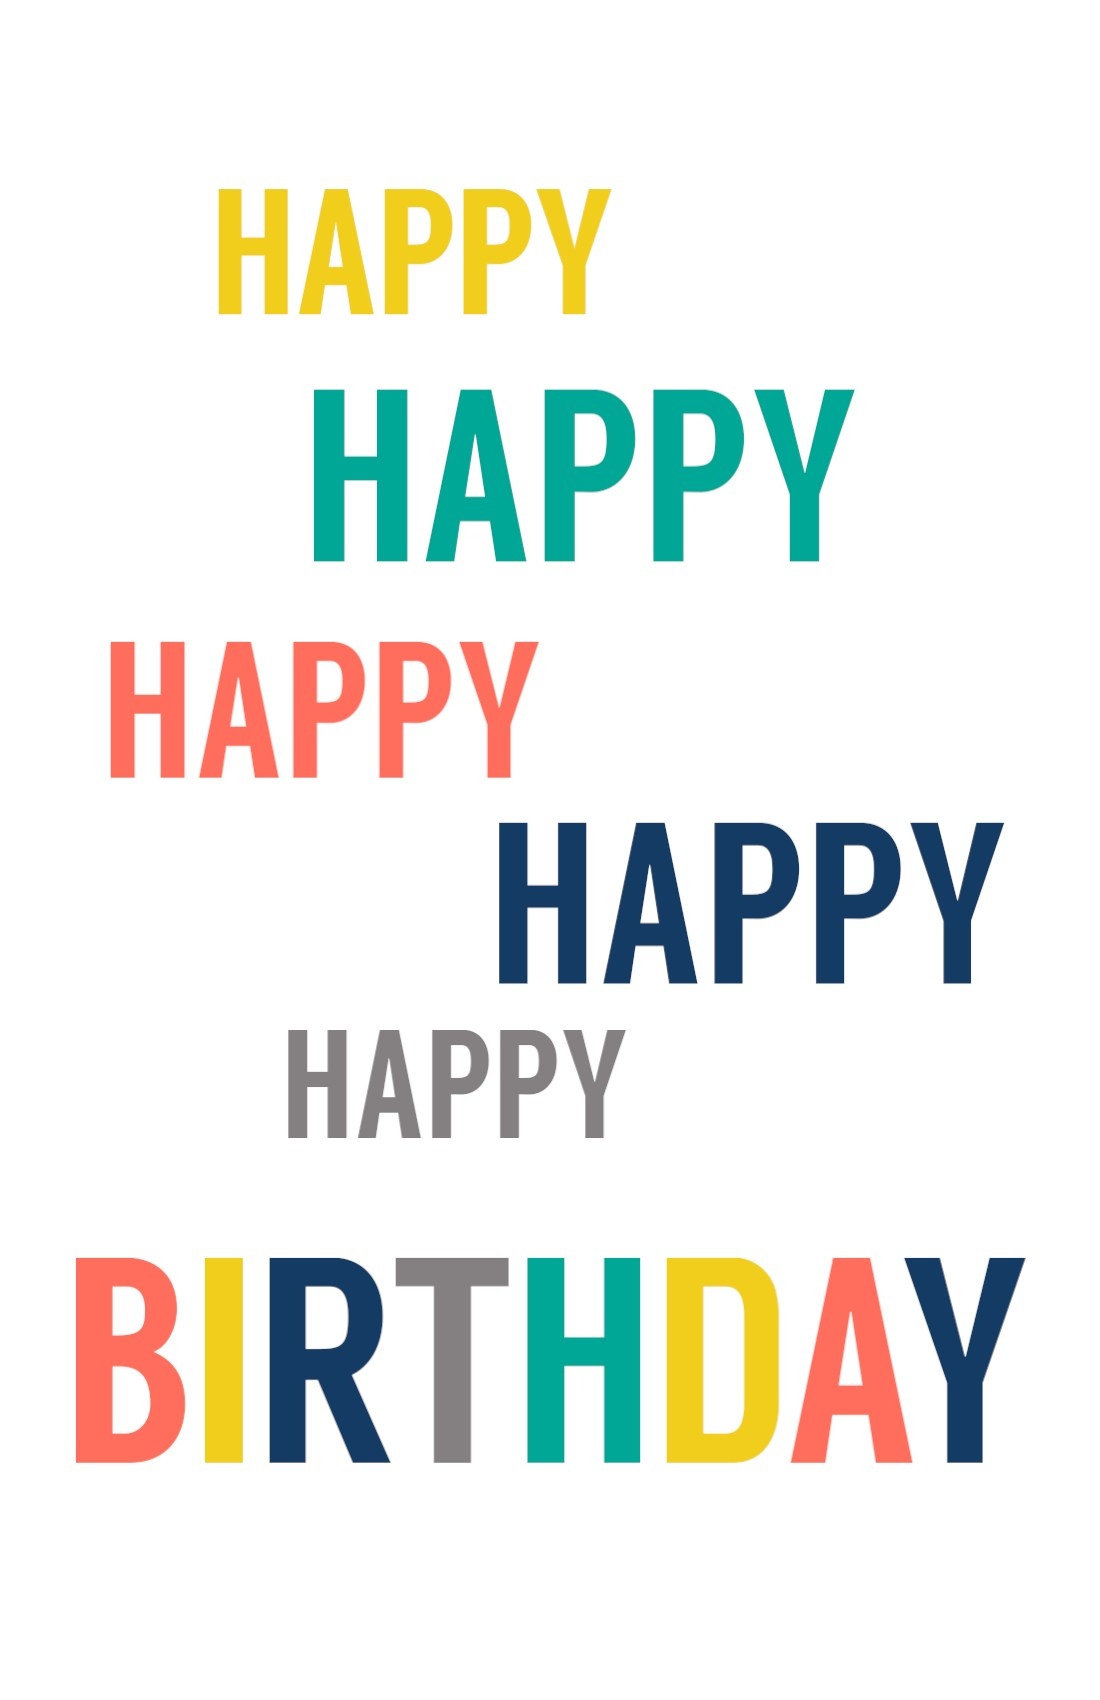 Free Printable Birthday Cards - Paper Trail Design - Free Printable Greeting Cards